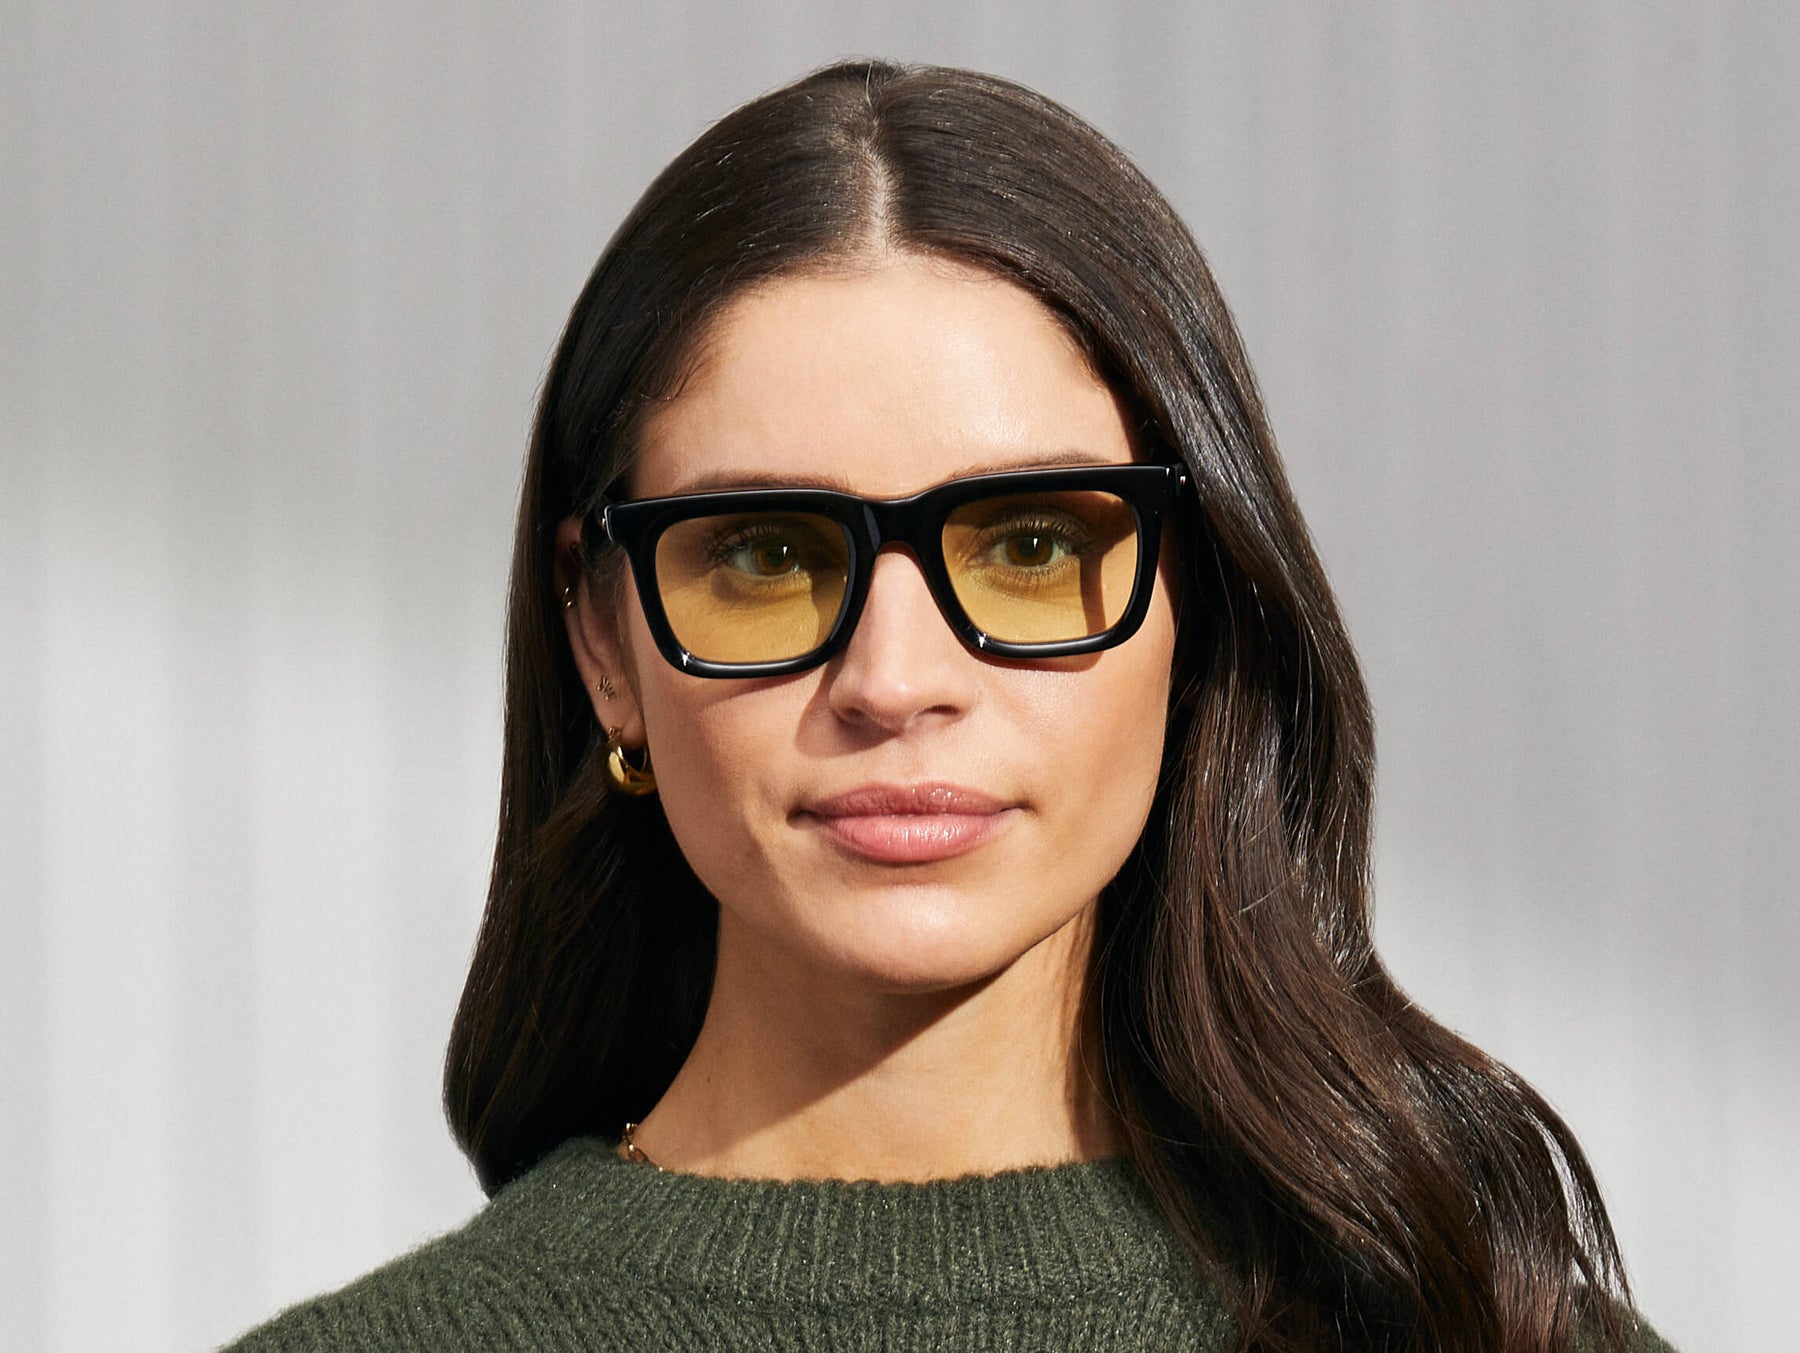 Model is wearing The RIZIK in Black in size 49 with Limelight Tinted Lenses